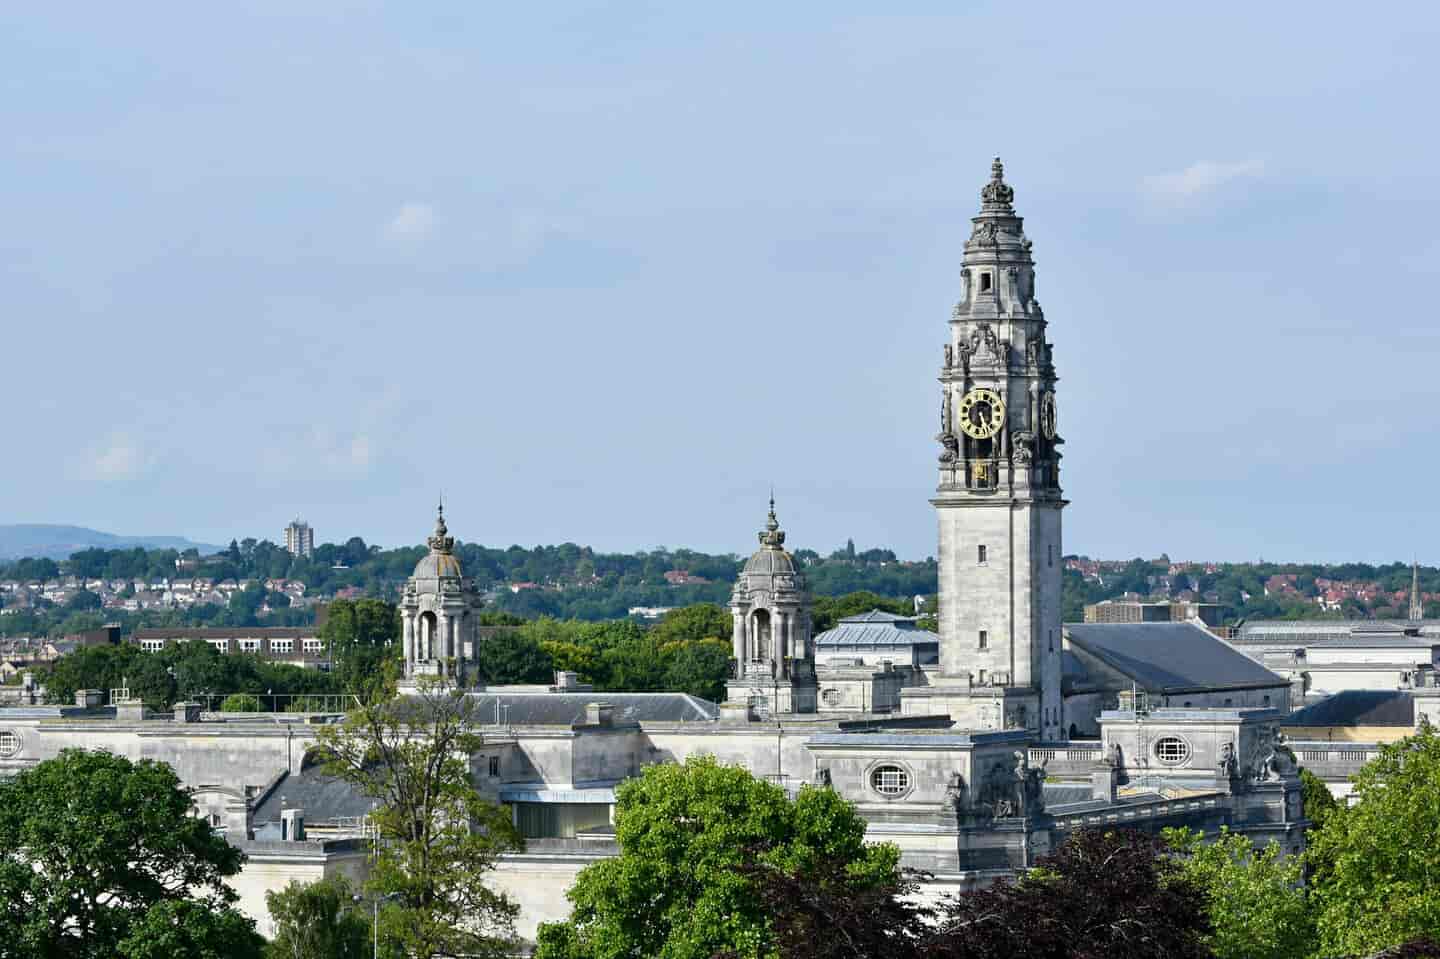 Student Accommodation in Cardiff - Cardiff City Hall clock tower